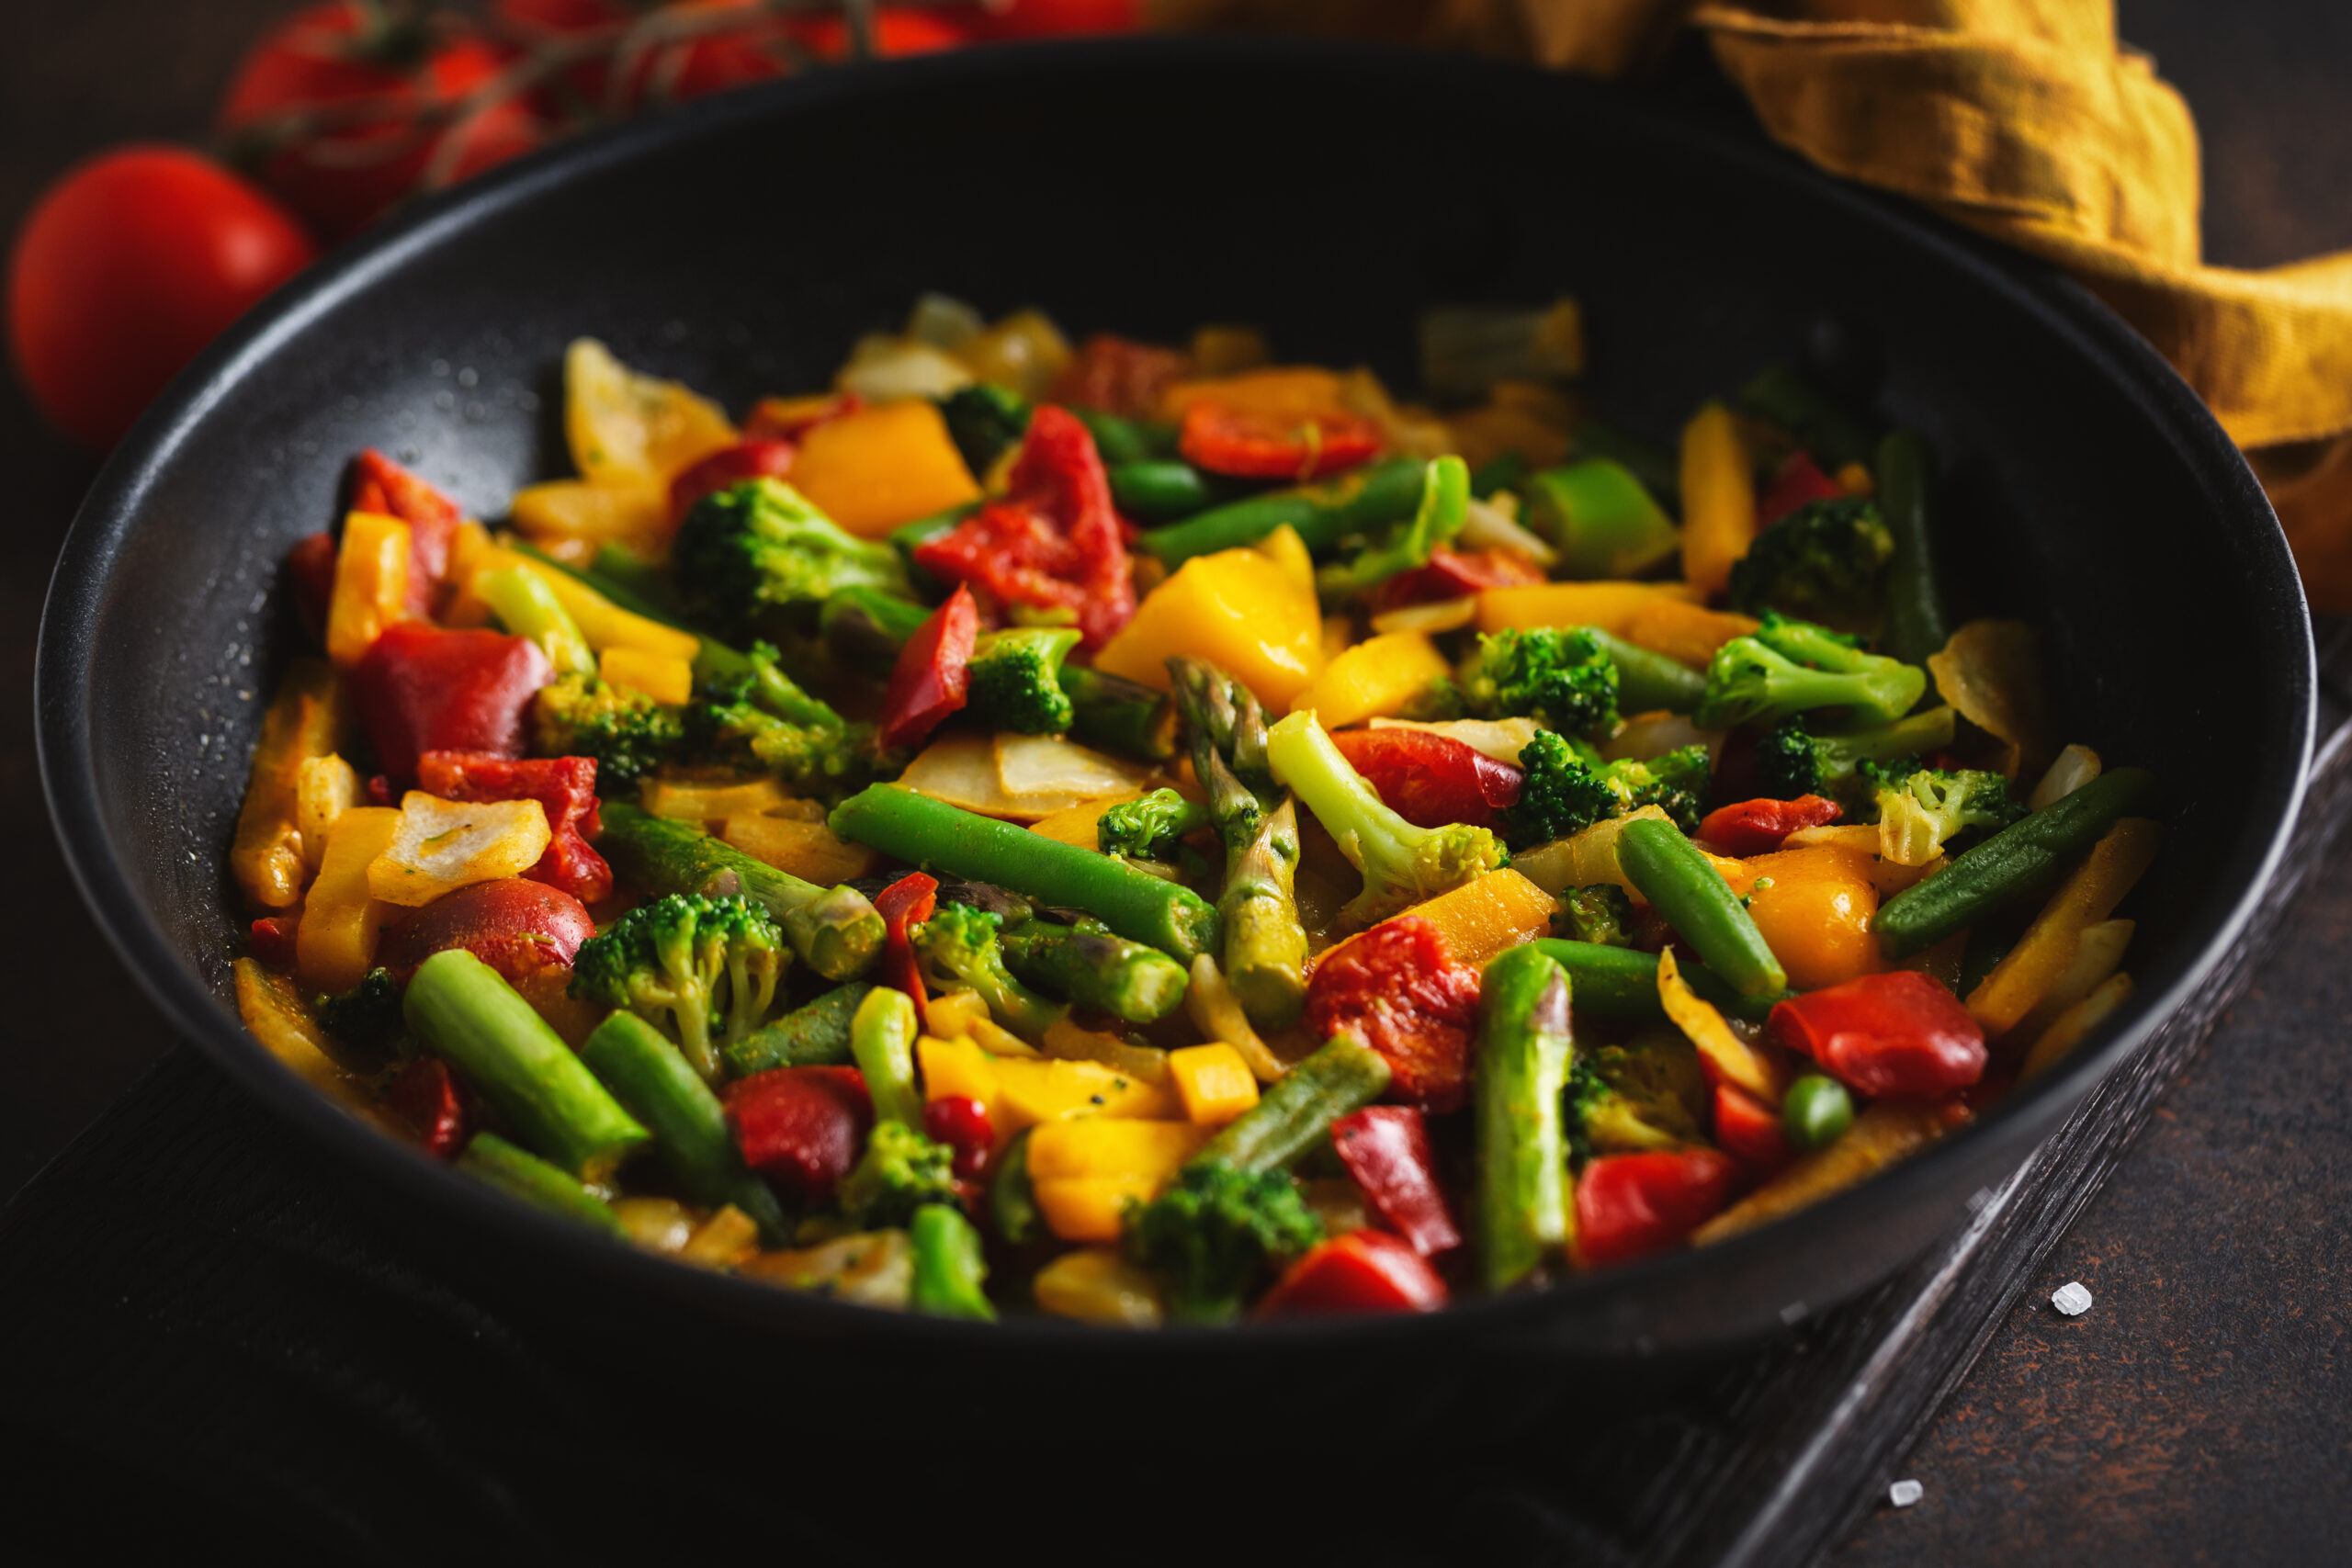 10-Minute Veggie Delight Quick and Easy Pure Vegetarian Stir-Fry!